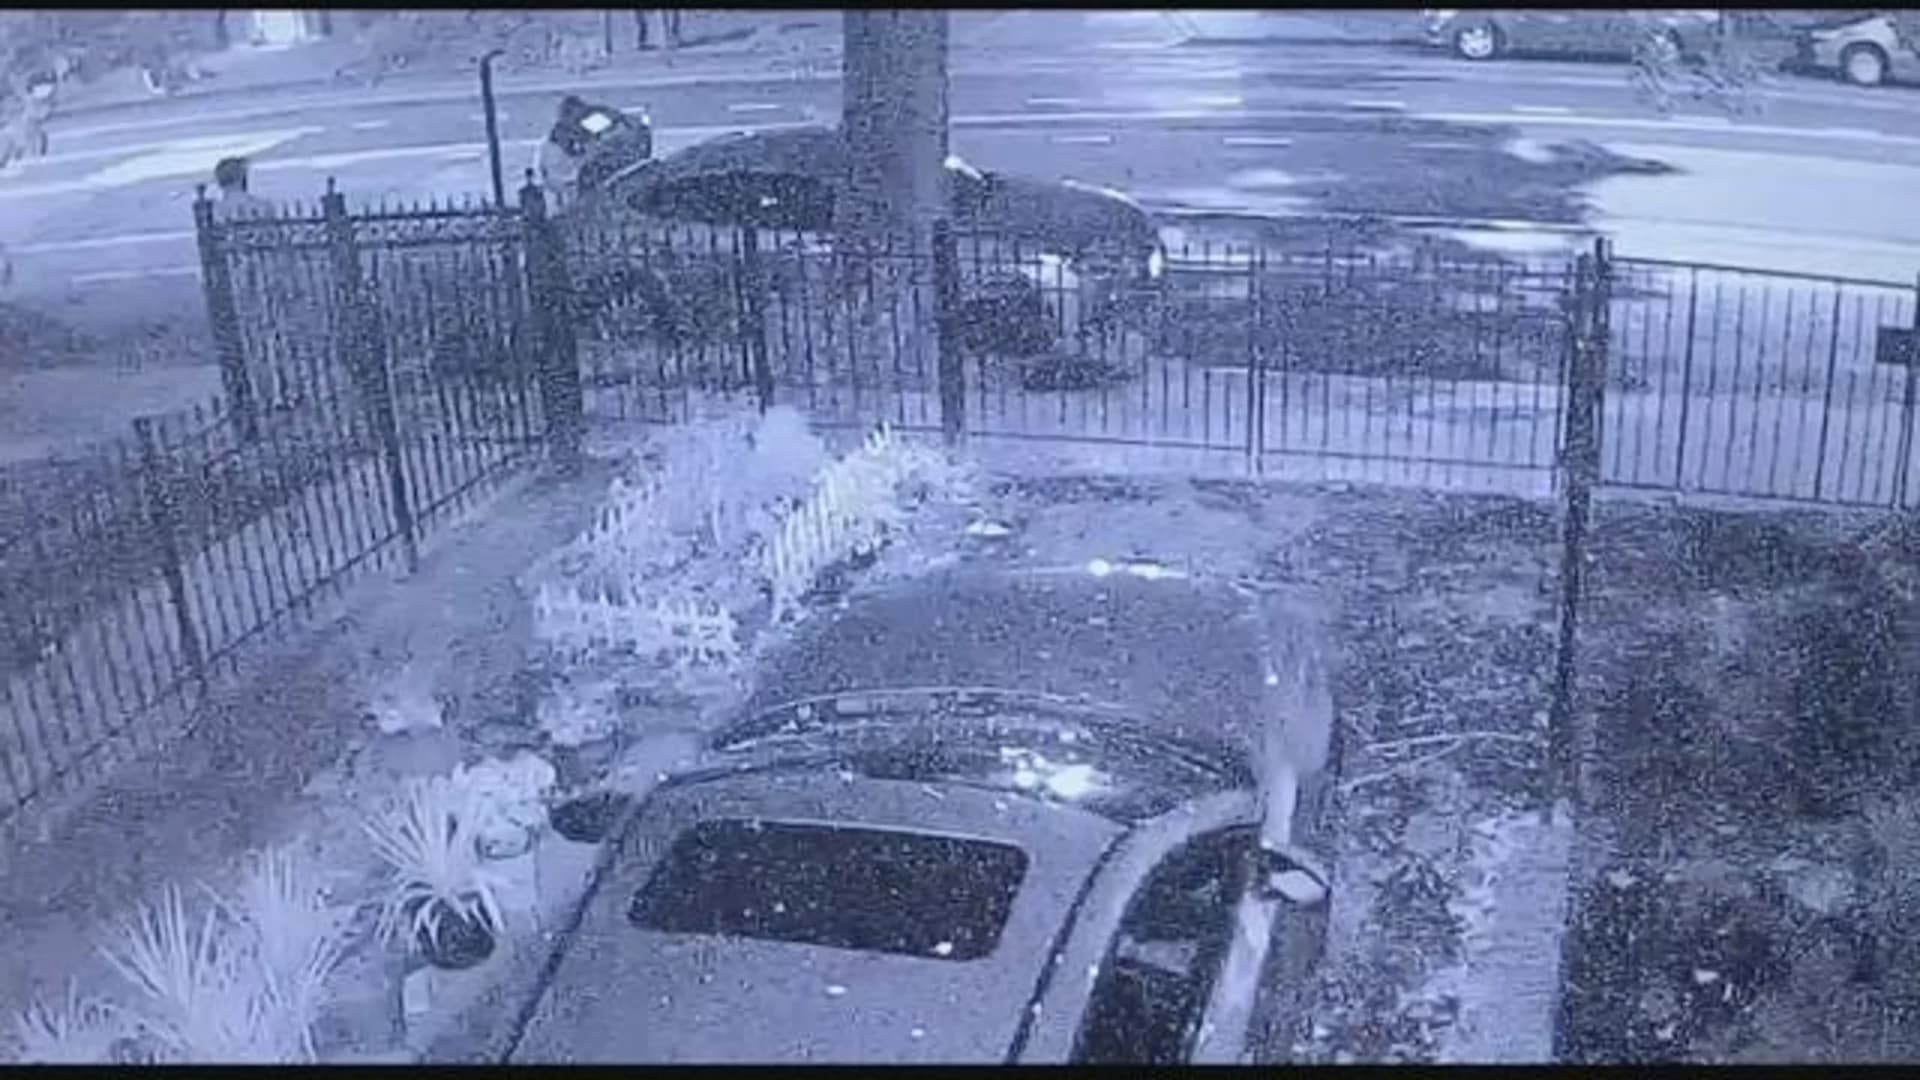 Man claims thieves stole up to $25,000 worth of his camera equipment in Williamsbridge